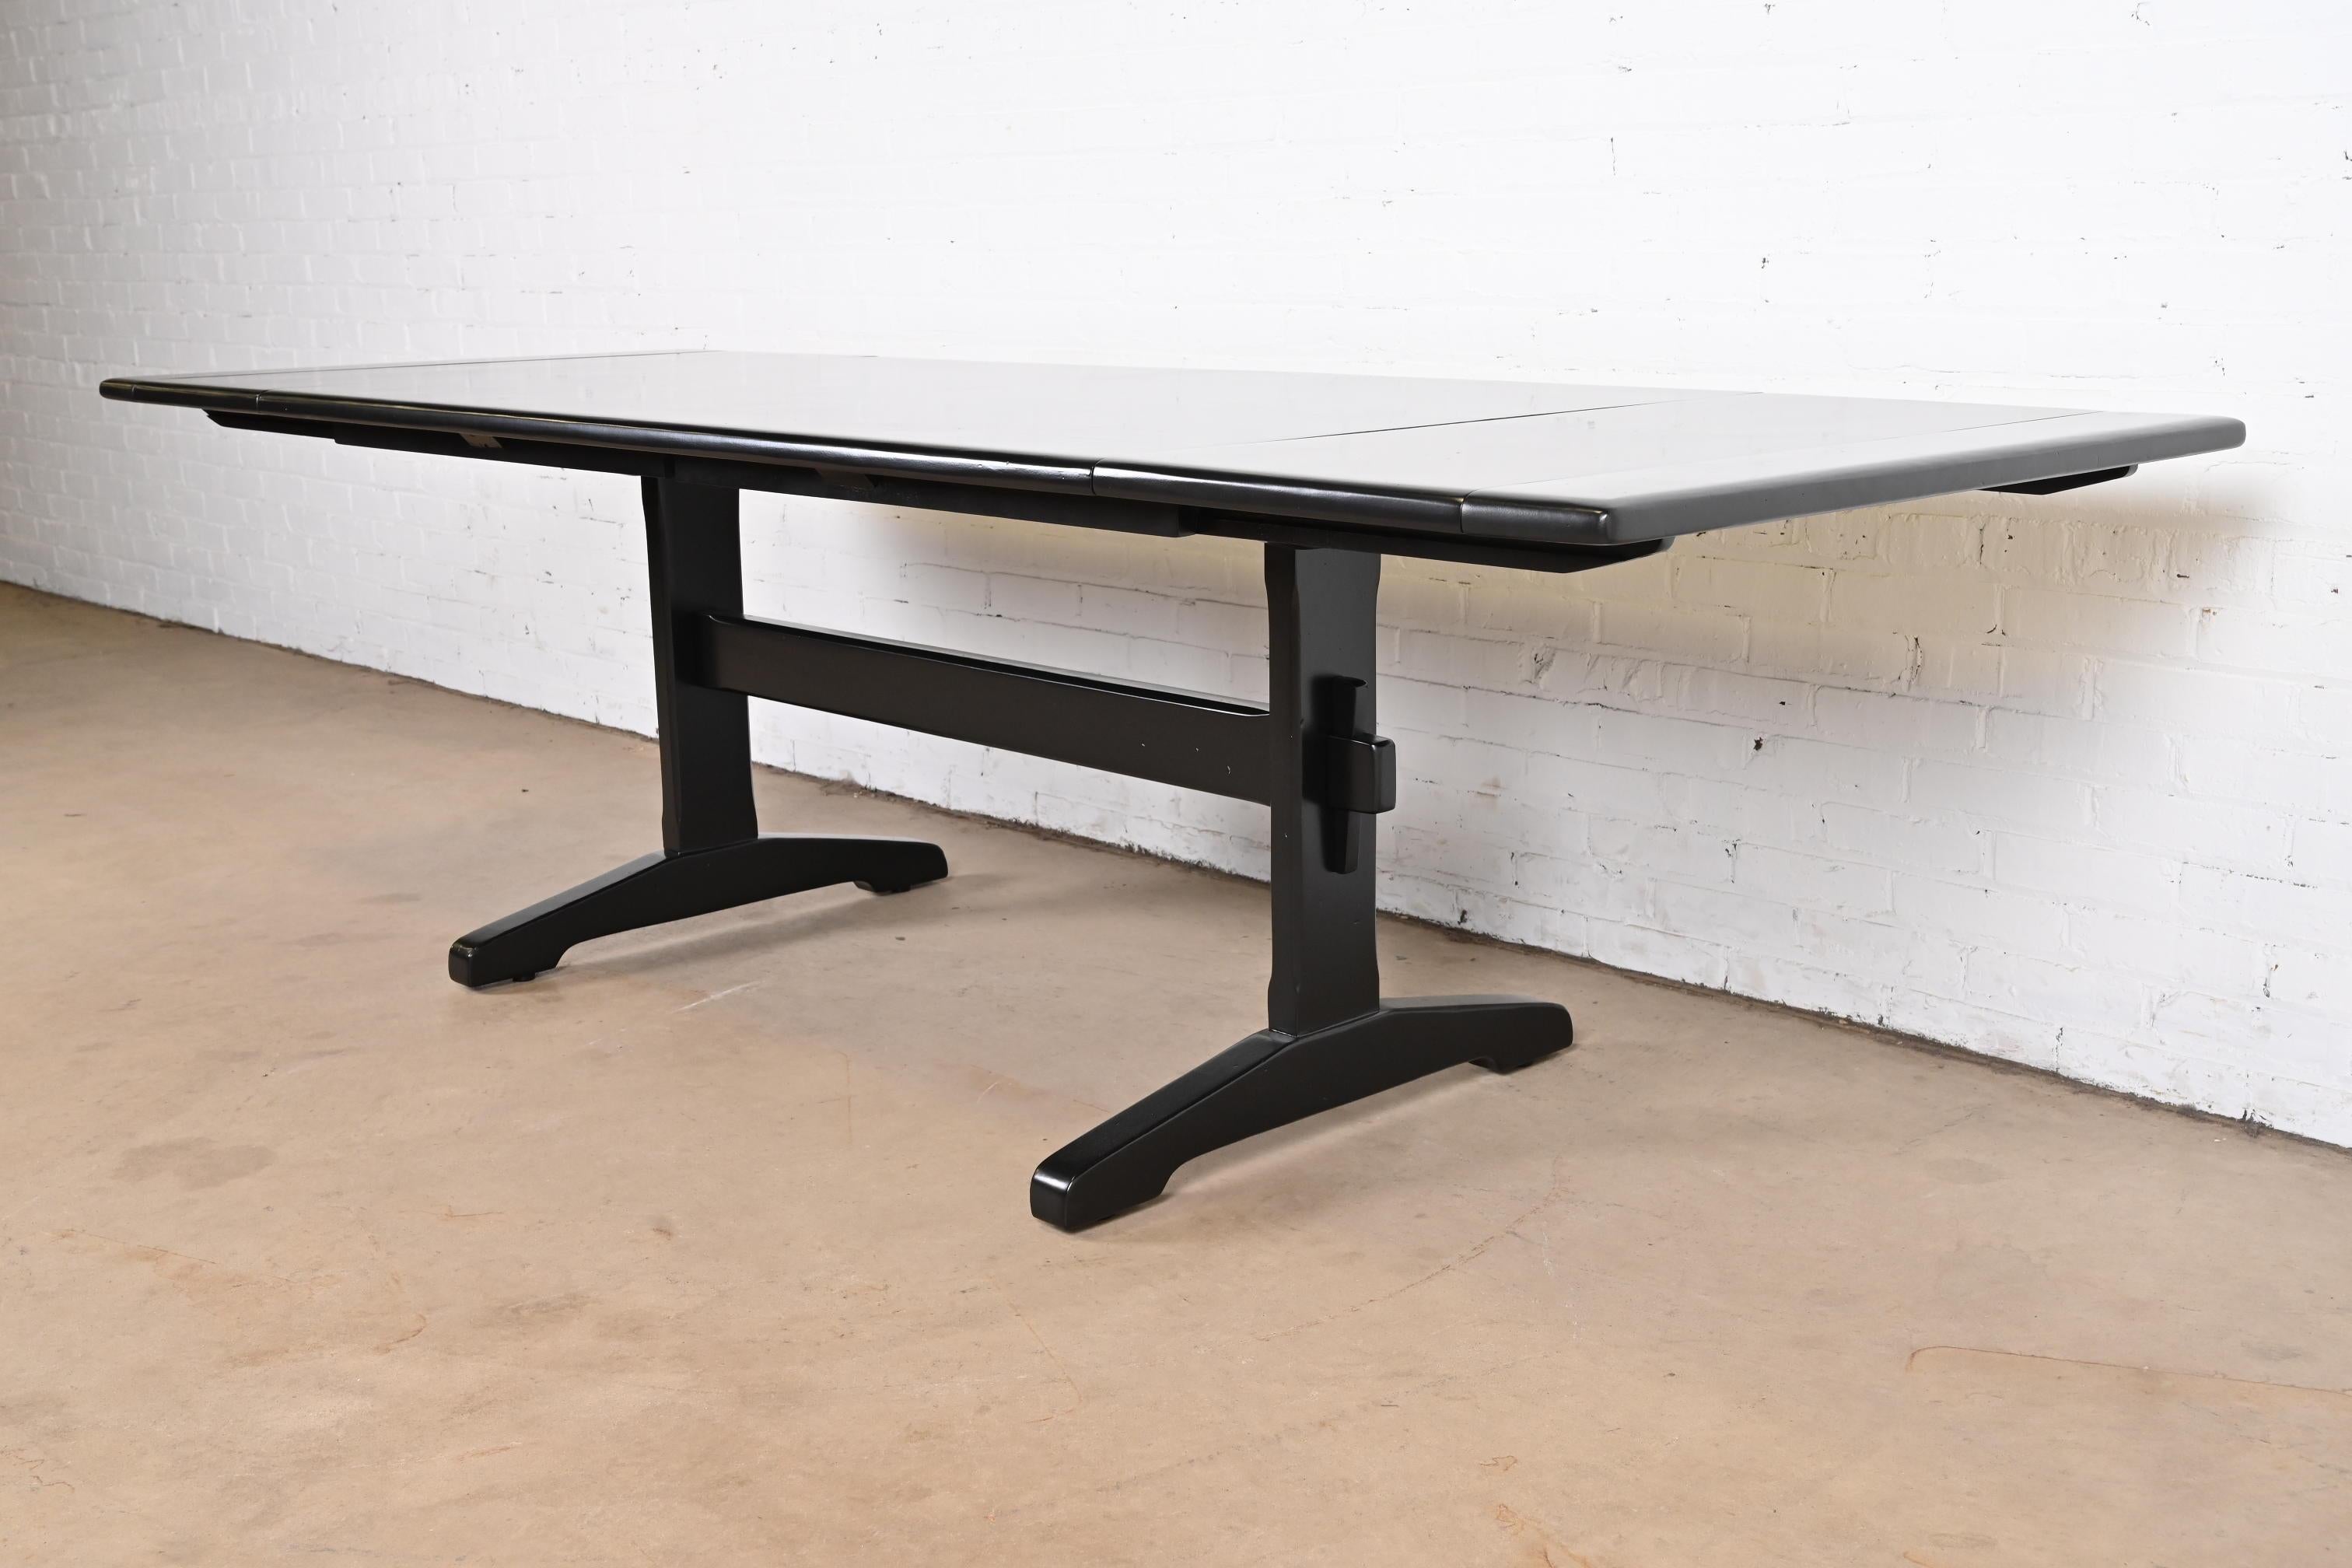 20th Century Black Lacquered Pine Trestle Base Farmhouse Dining Table, Refinished For Sale